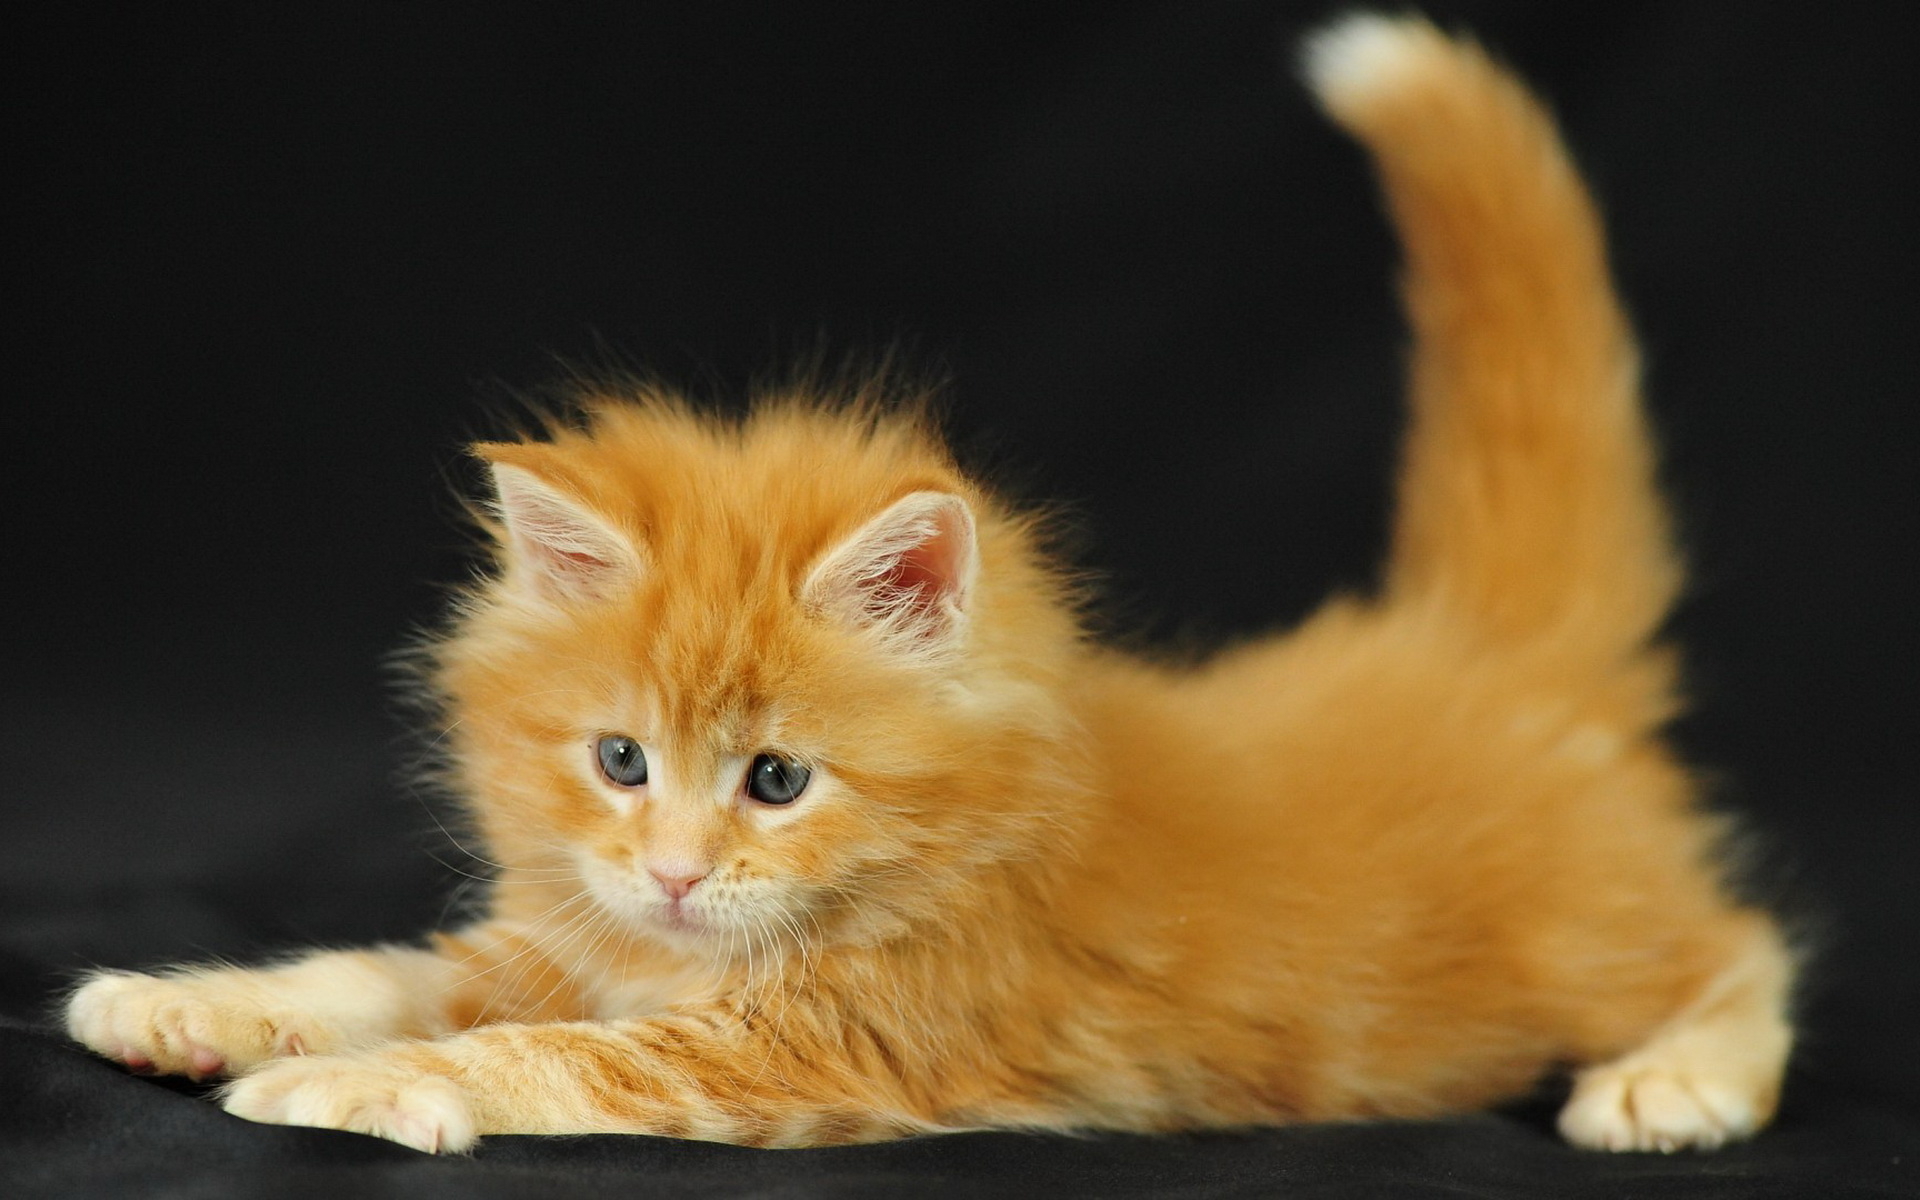 Ginger kitten wallpapers and images - wallpapers, pictures, photos